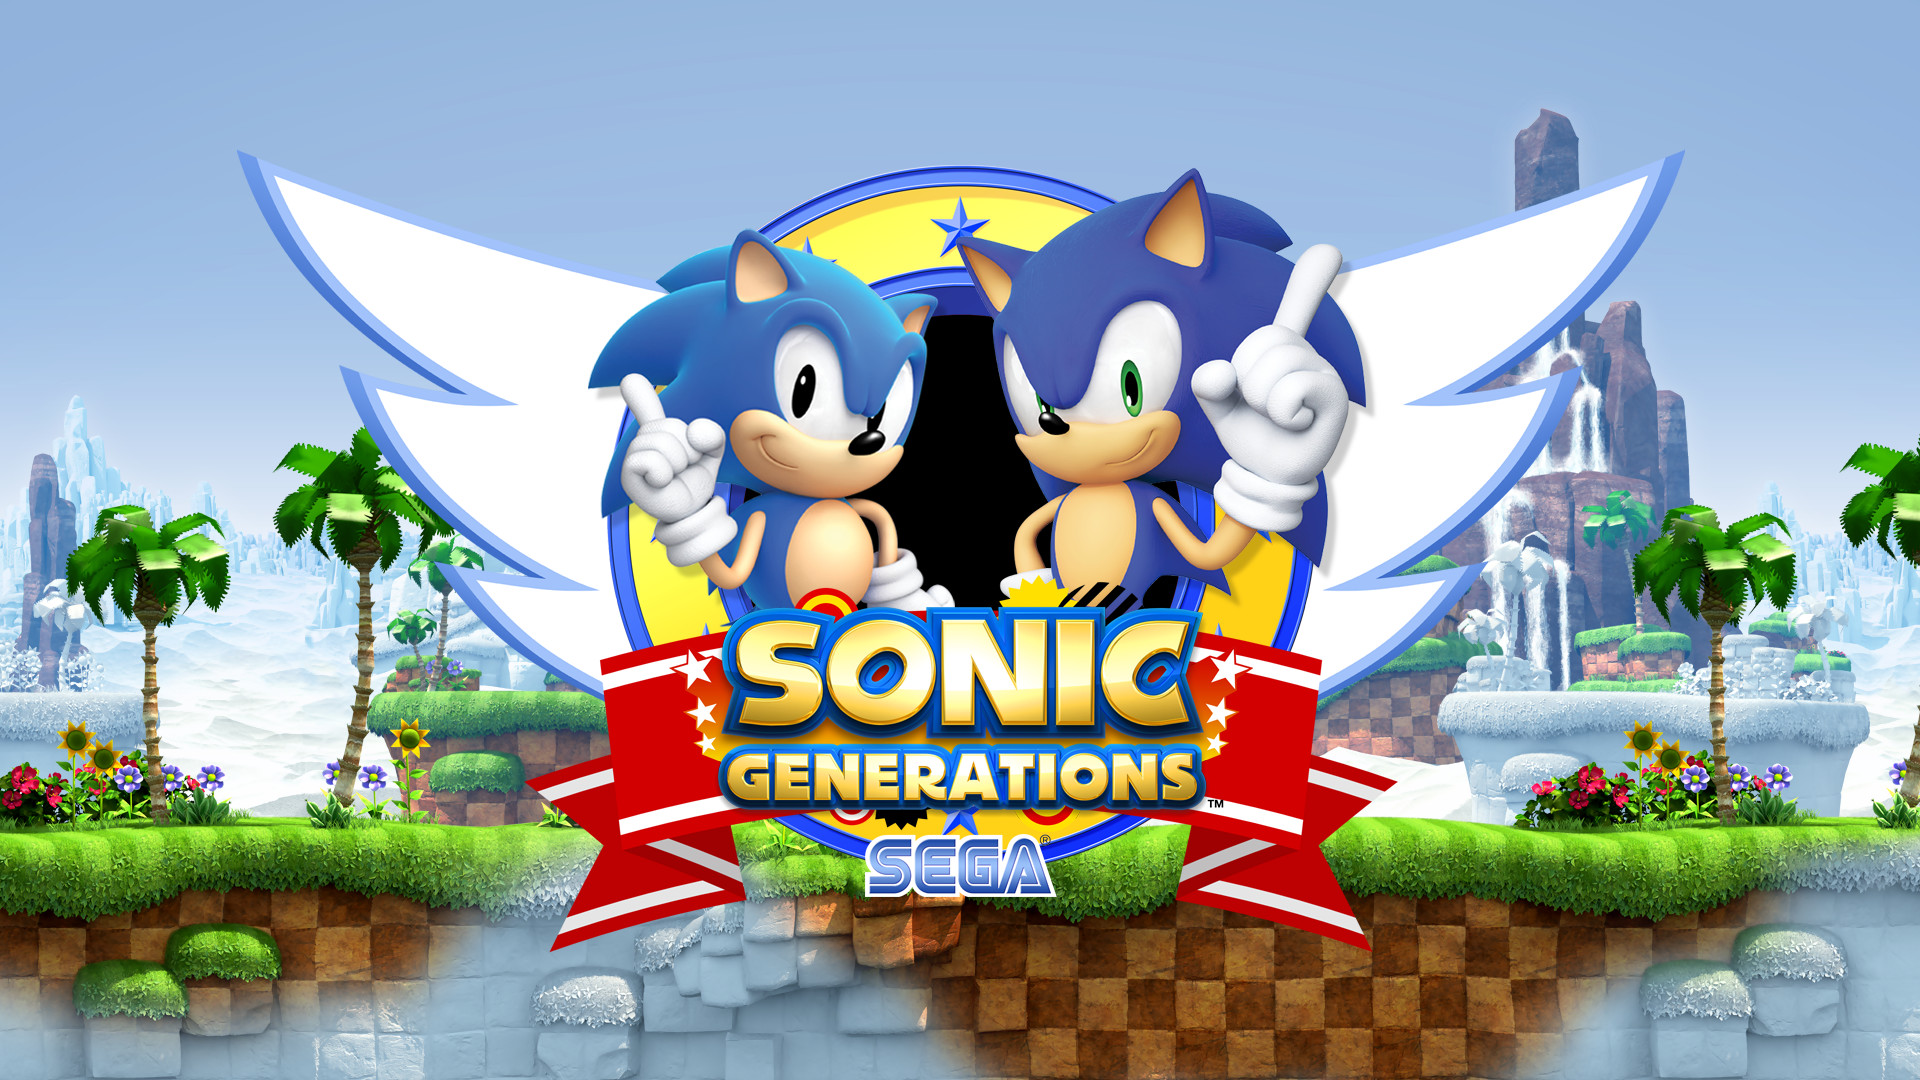 1920x1080 Video Game - Sonic Generations Generations Sonic the Hedgehog Wallpaper